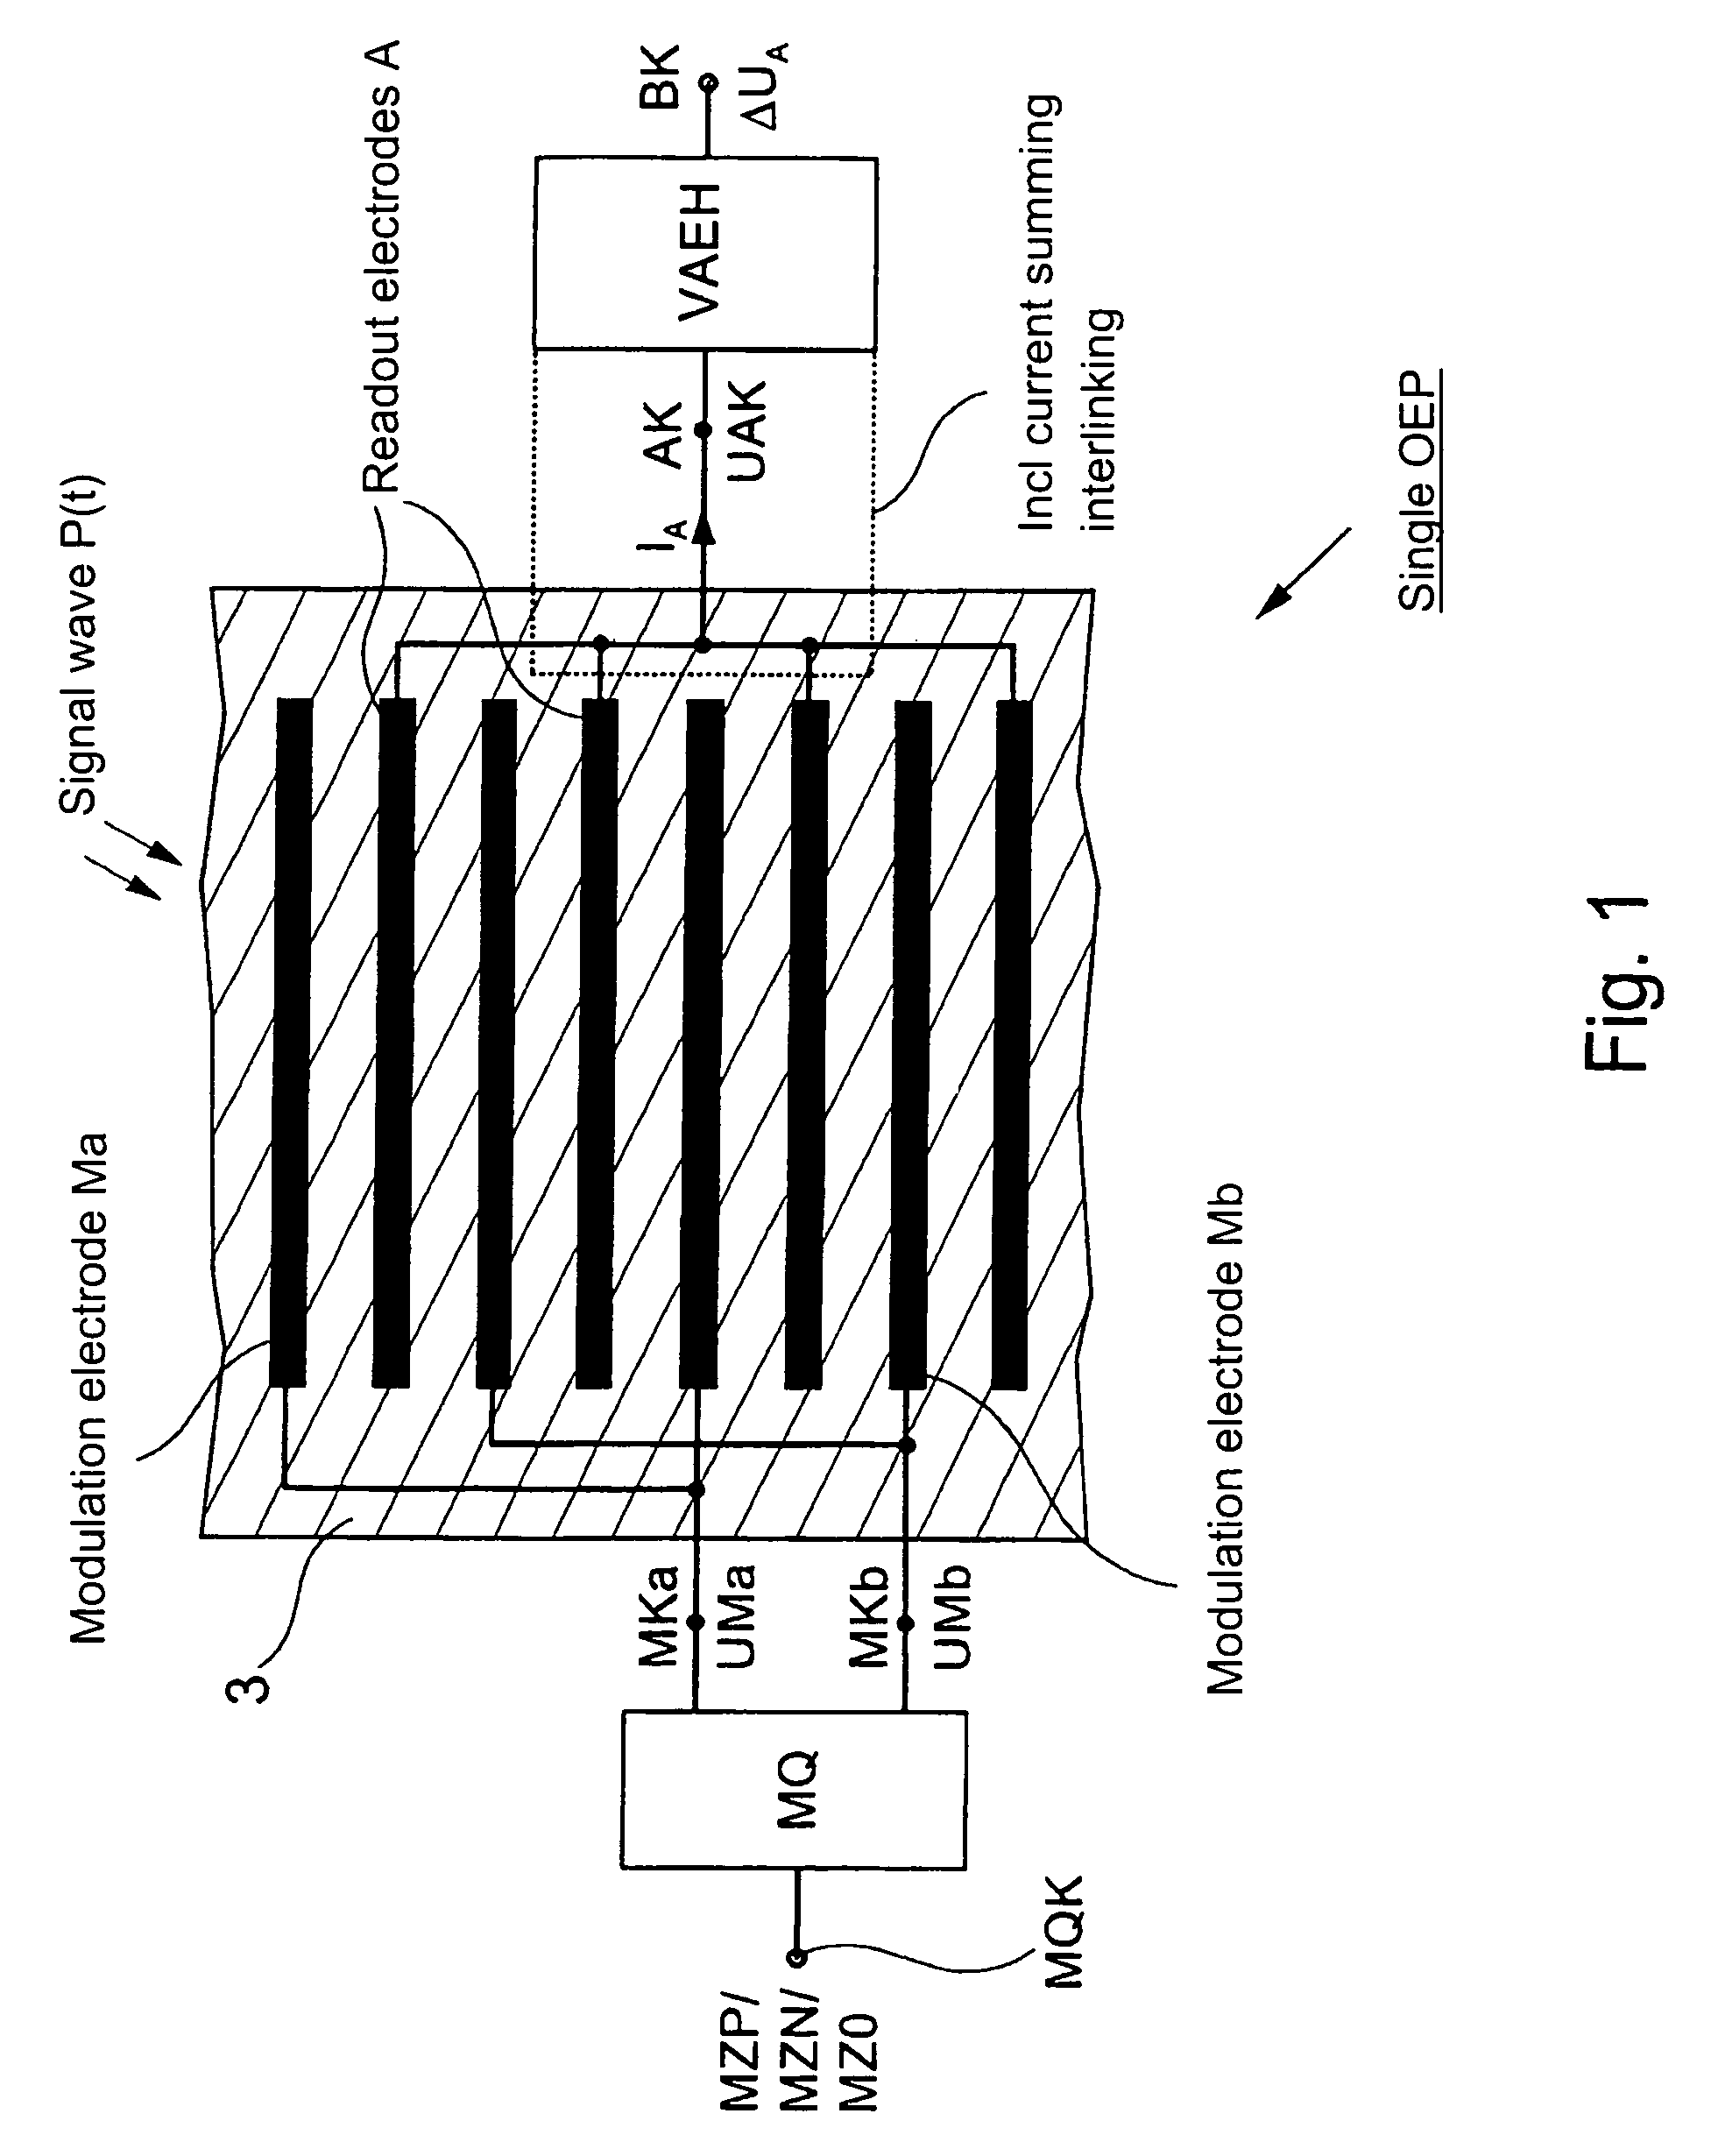 Method and device for detecting and processing electric and optical signals